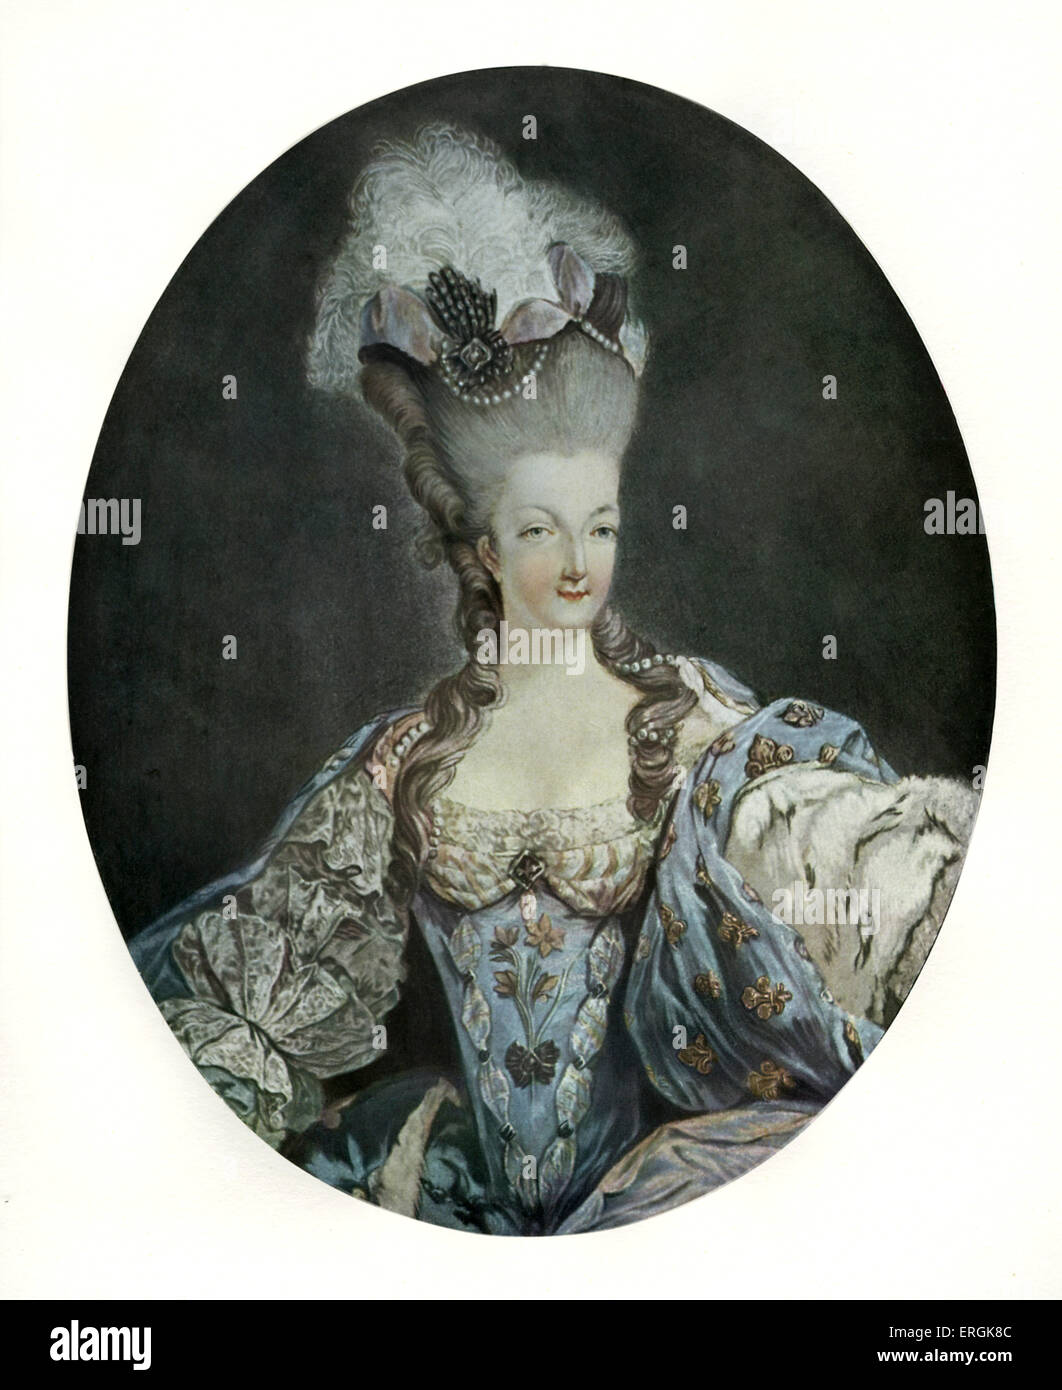 Marie Antoinette, Queen of France (1755 - 1793)  - after engraving  by Francois Janinet. Married Louis XVI in 1770 and became Stock Photo